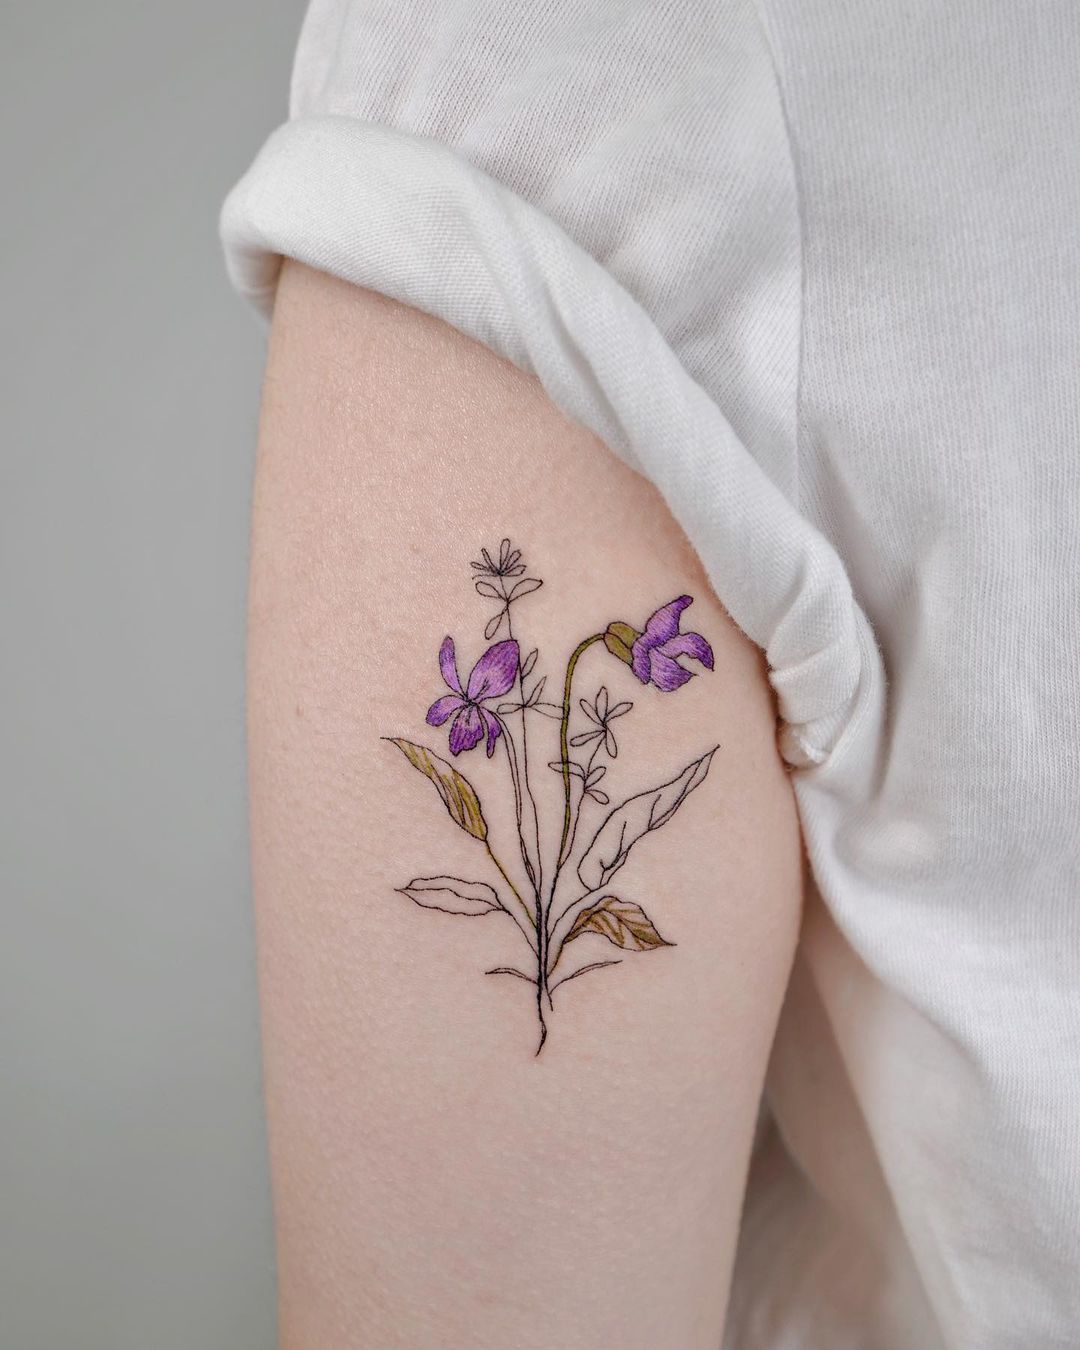 20 top tattoo trends for 2021 and 5 trends to avoid at all costs